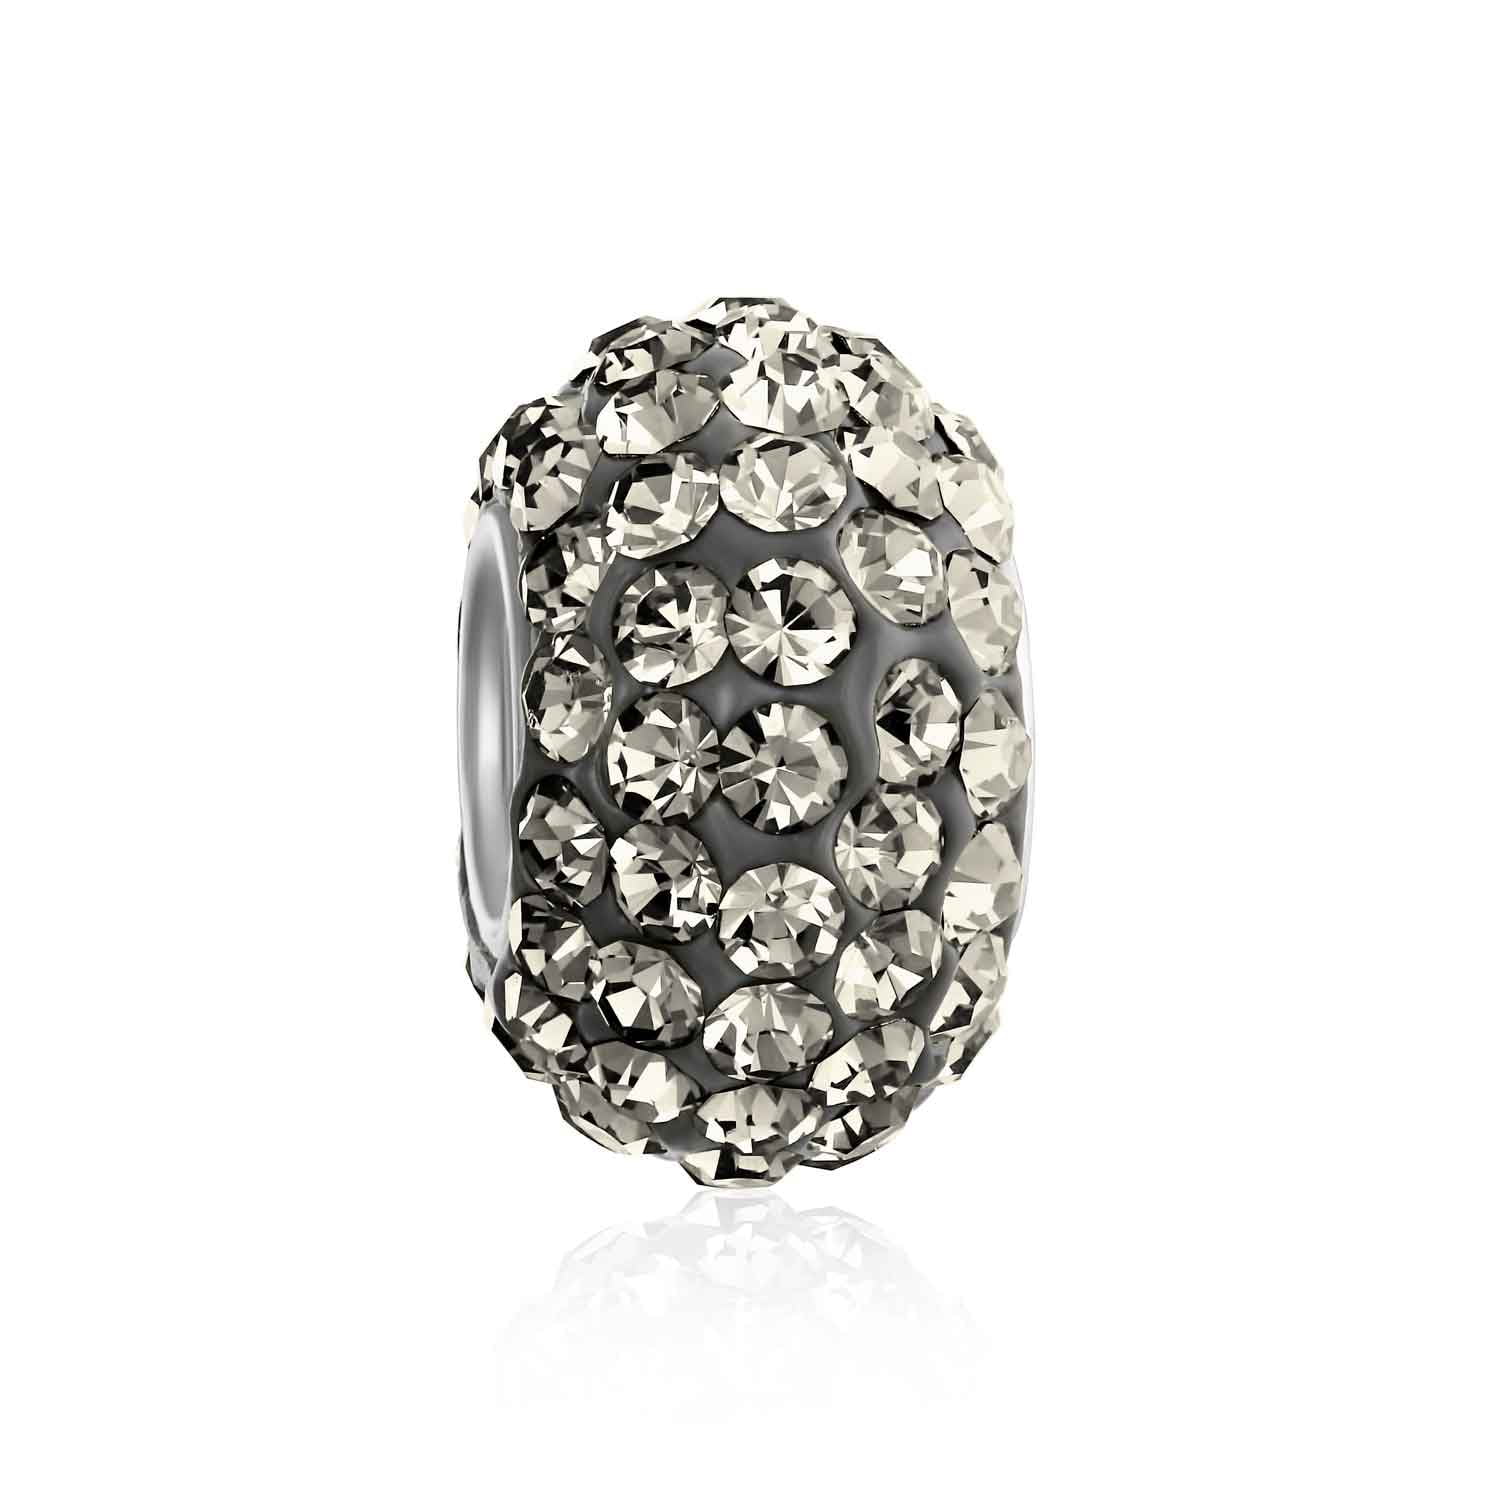 925 Silver Sterling White Crystal Pave Waves Ball Charm Fits European bracelet